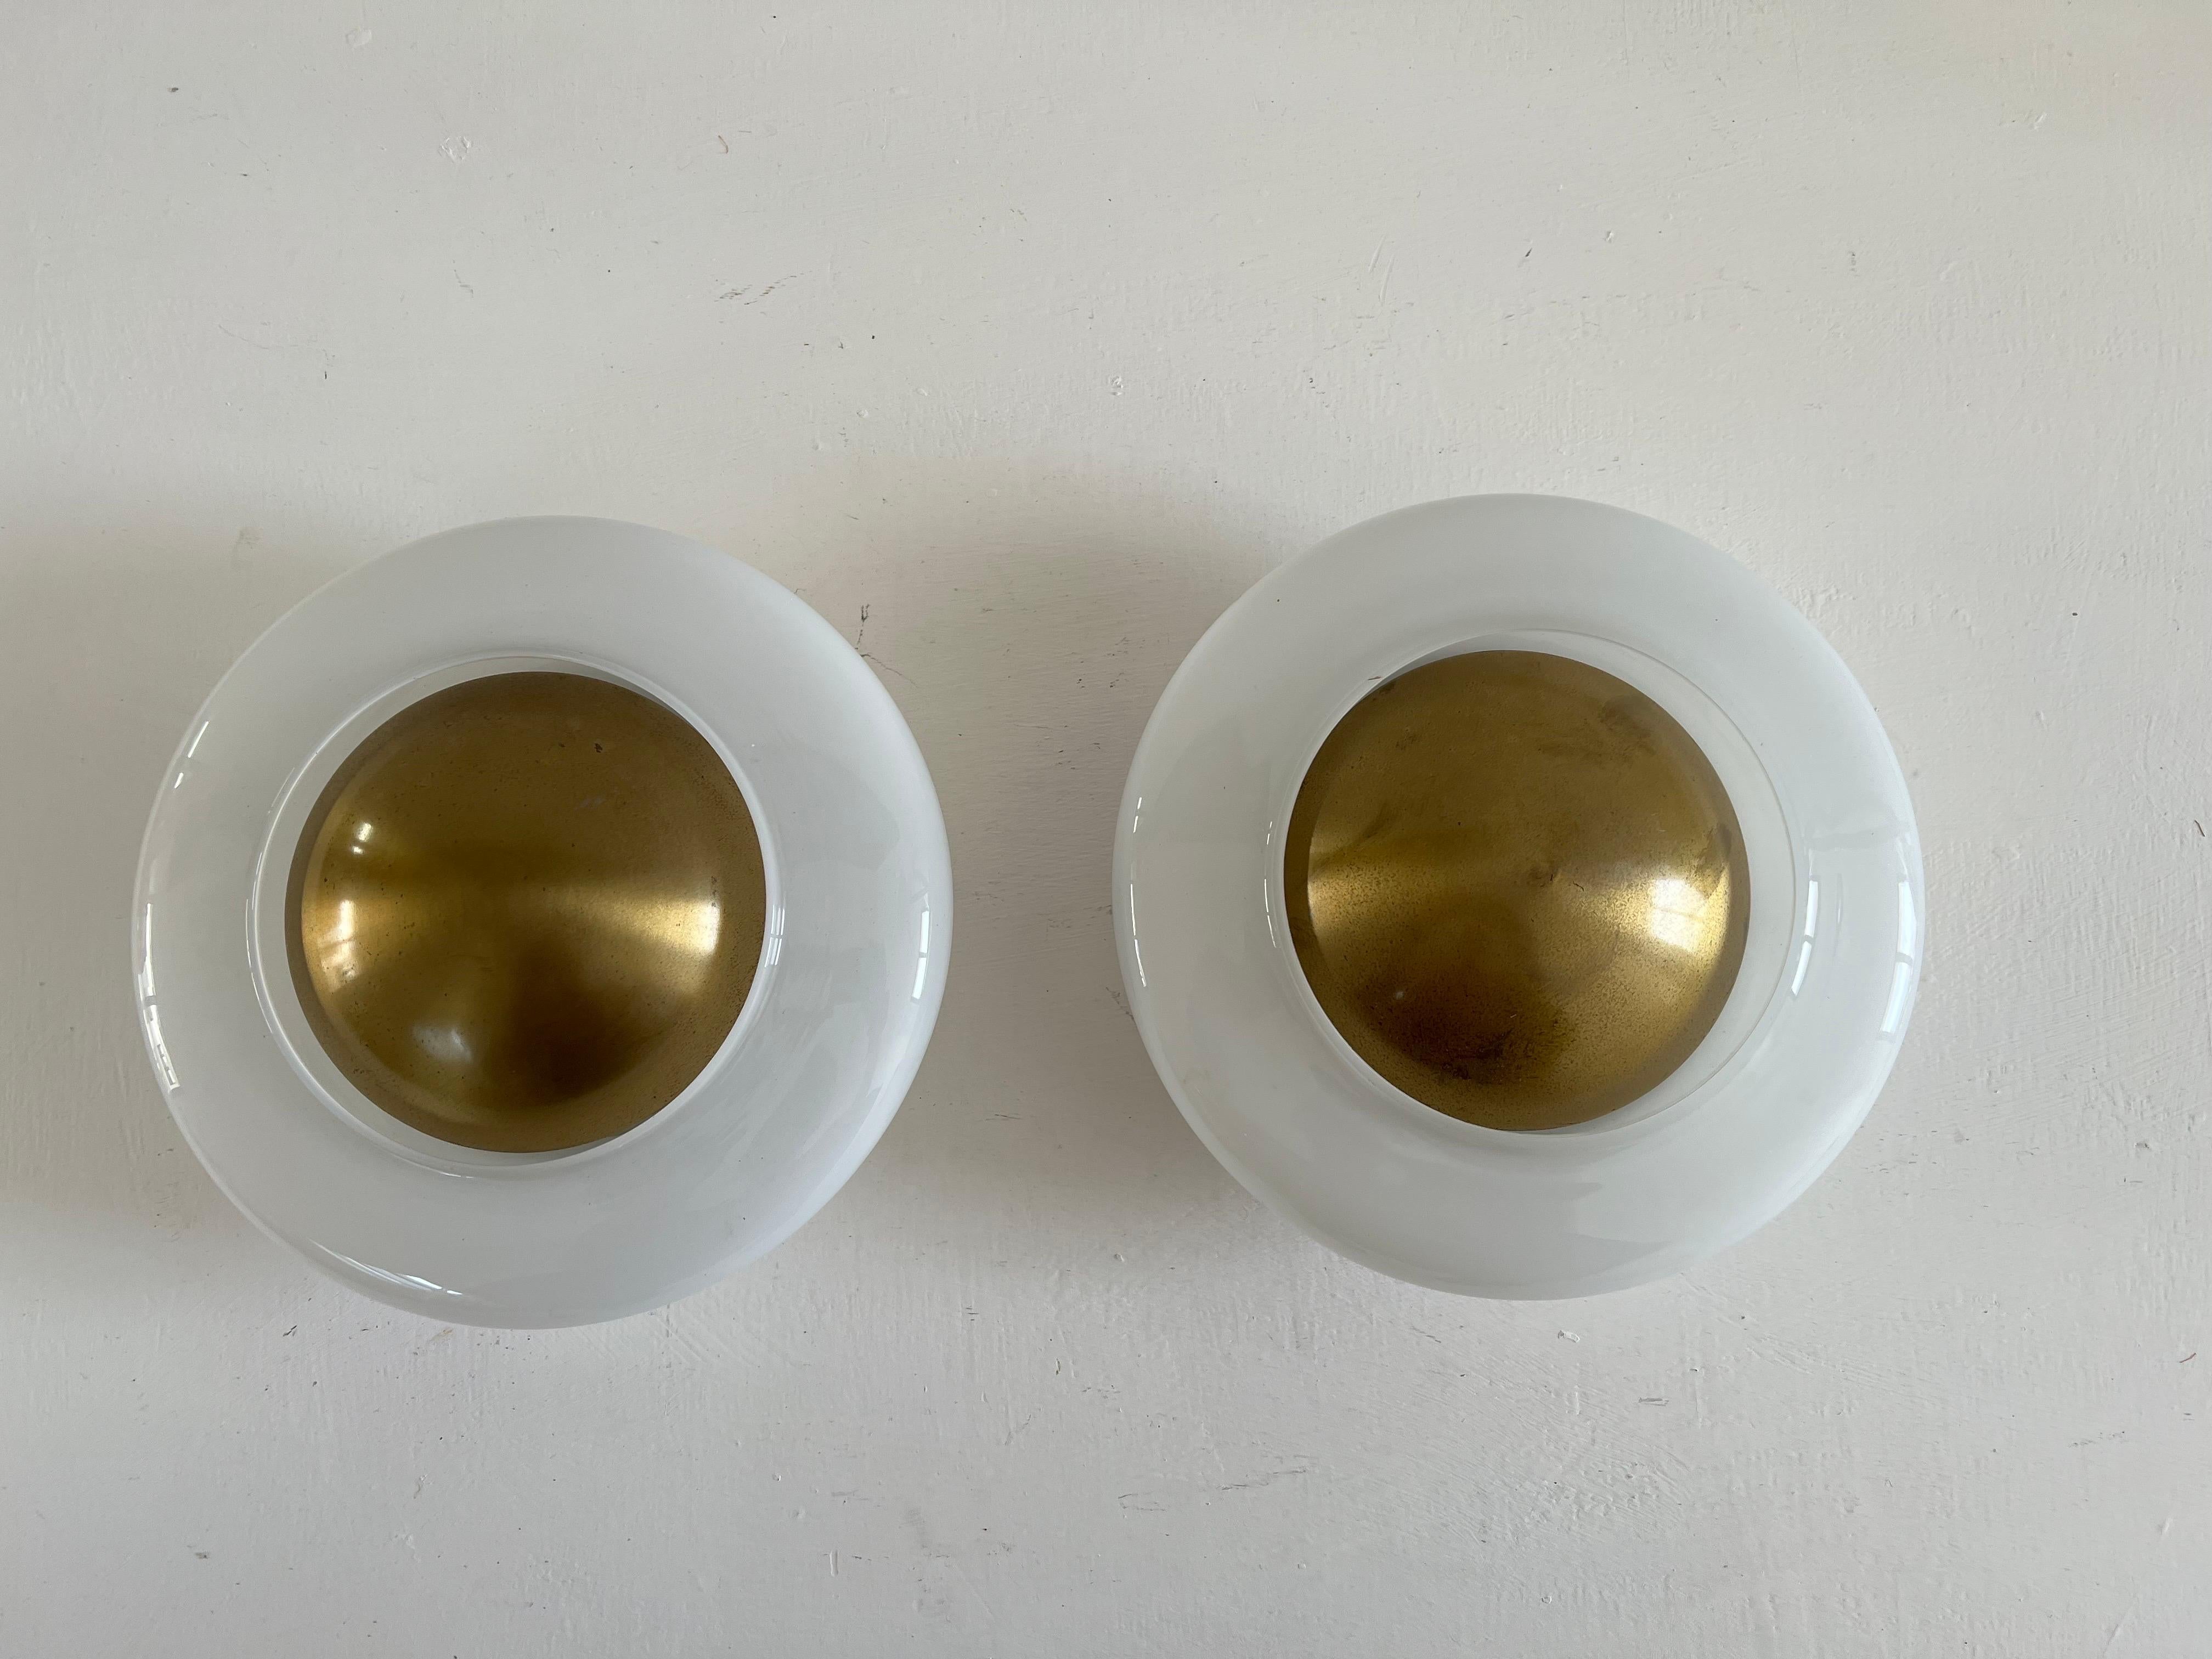 4 Mid-Century Modern Flush Mounts or sconces by Valenti made in Italy circa 1960 and produced in blown glass and brass.
Both still retain their papel labels.
Each holds two e14 bulbs. 
Priced individually.